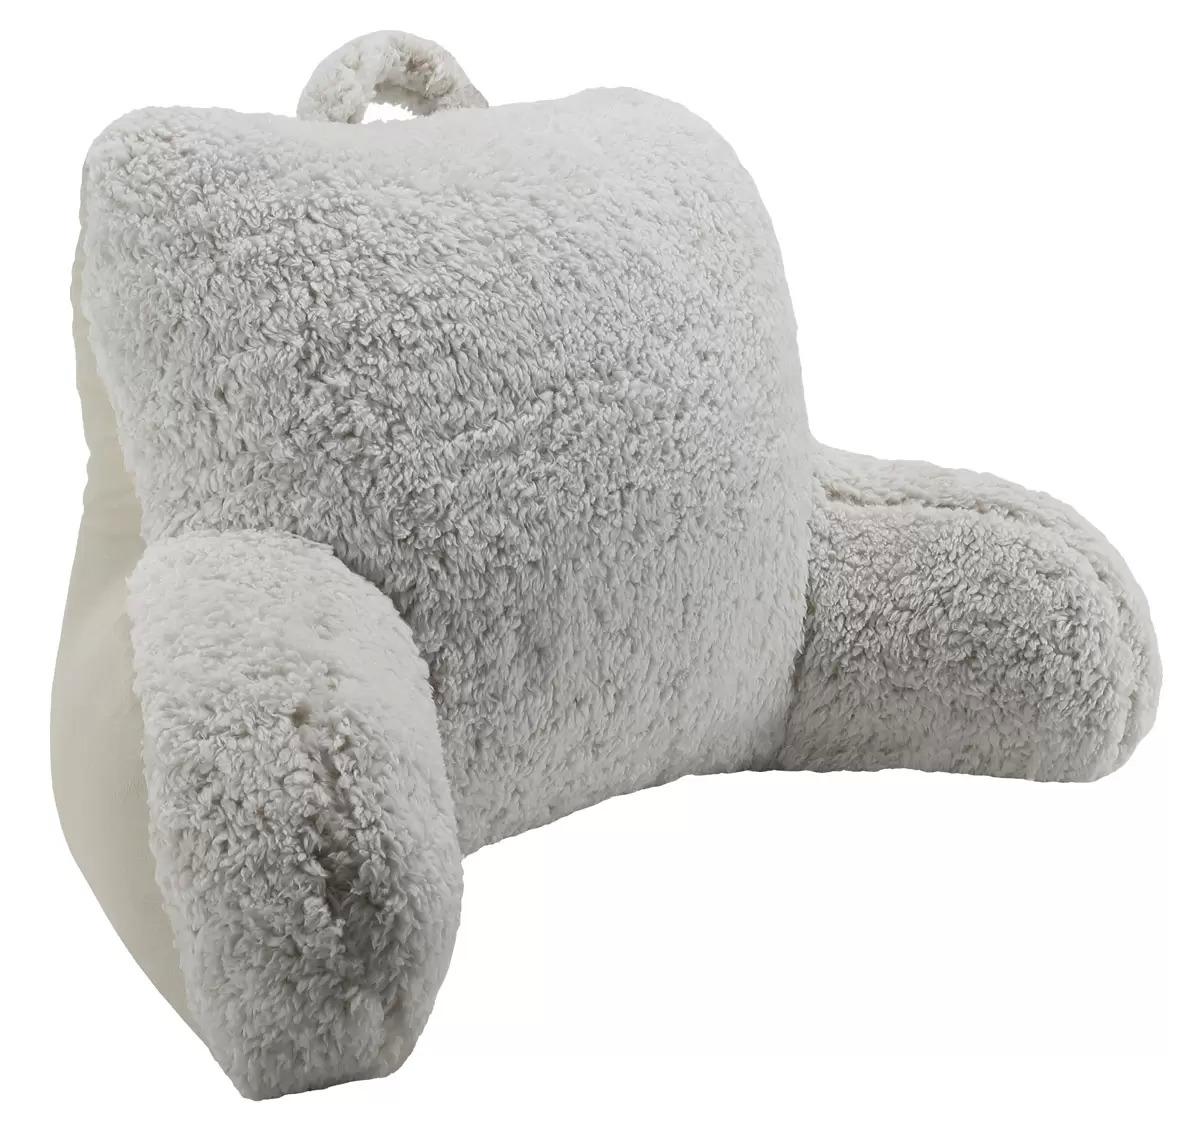 Room Essentials Sherpa Bed Rest Pillow for $9